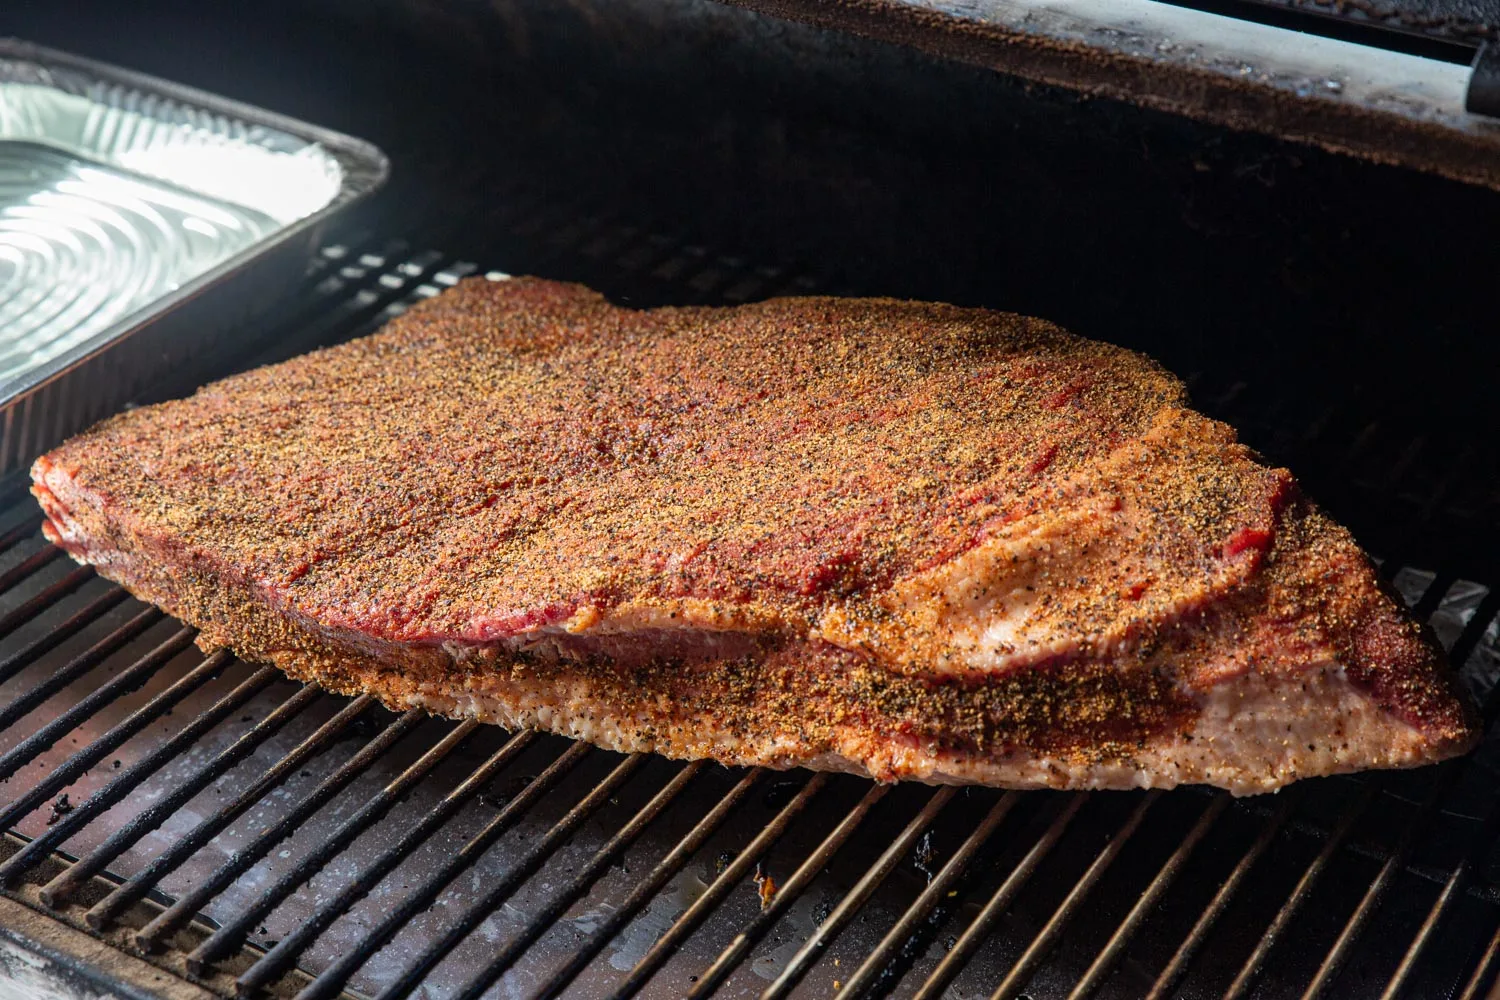 Brisket on the pellet grill, ready to be smoked. The rub is generous but can breathe.